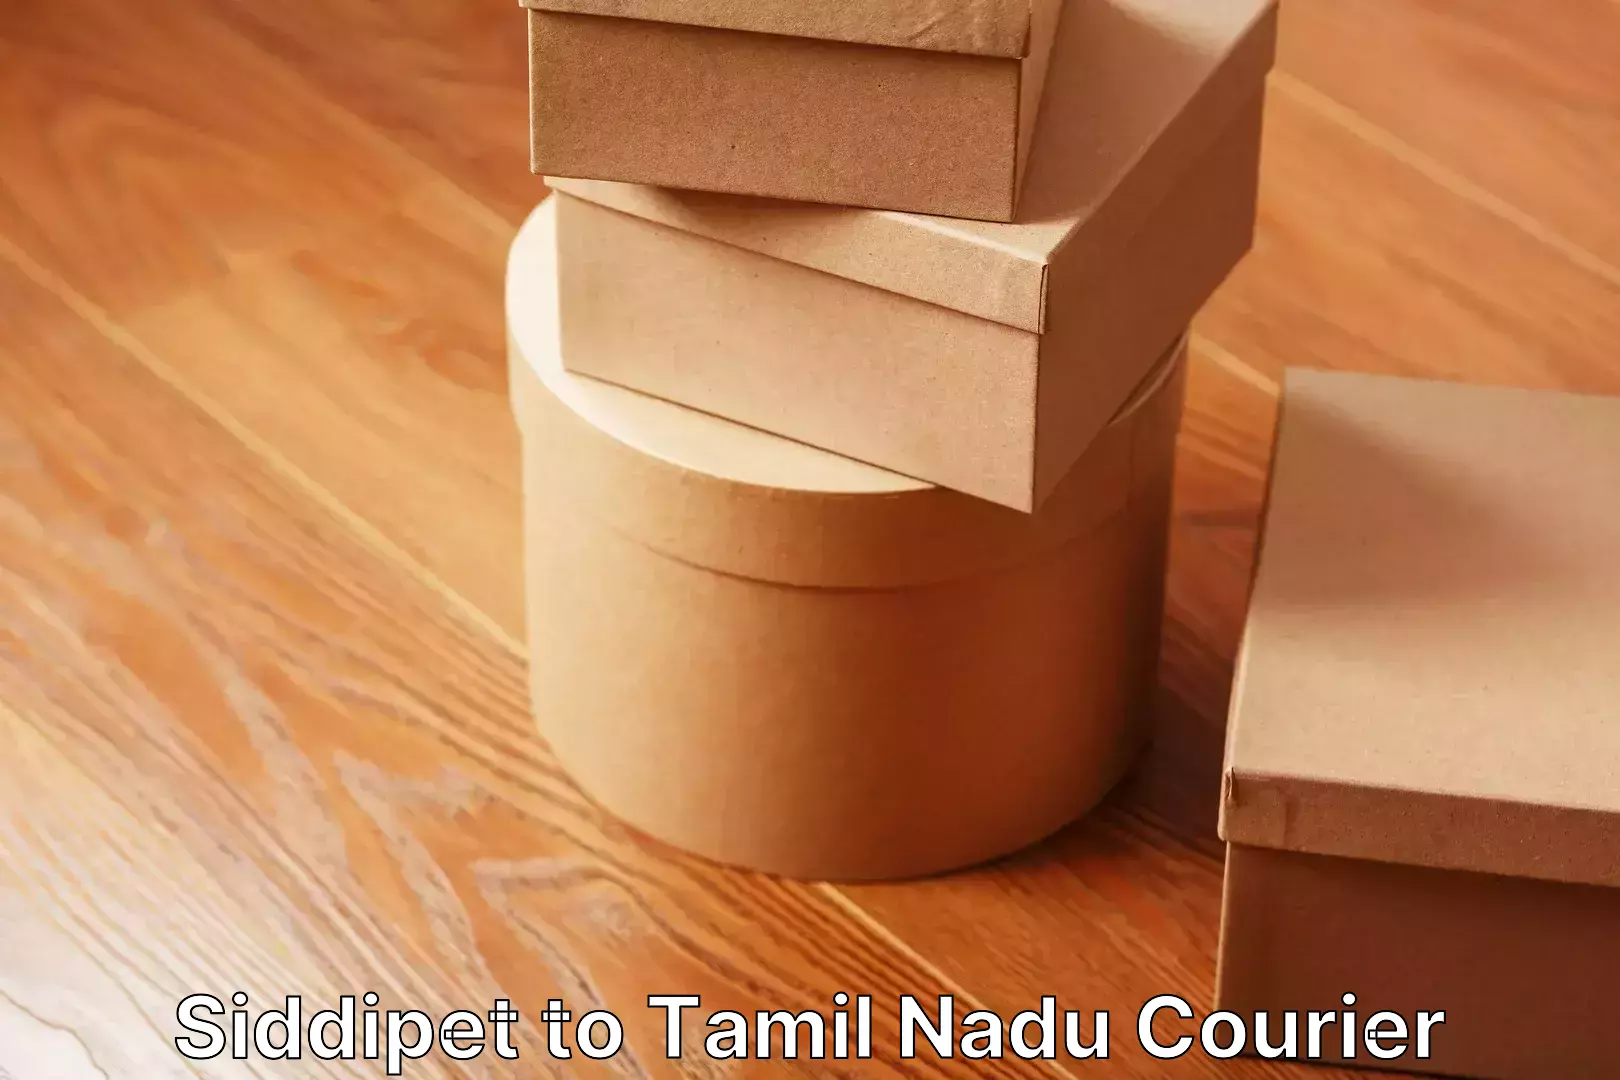 Professional packing and transport in Siddipet to Tamil Nadu